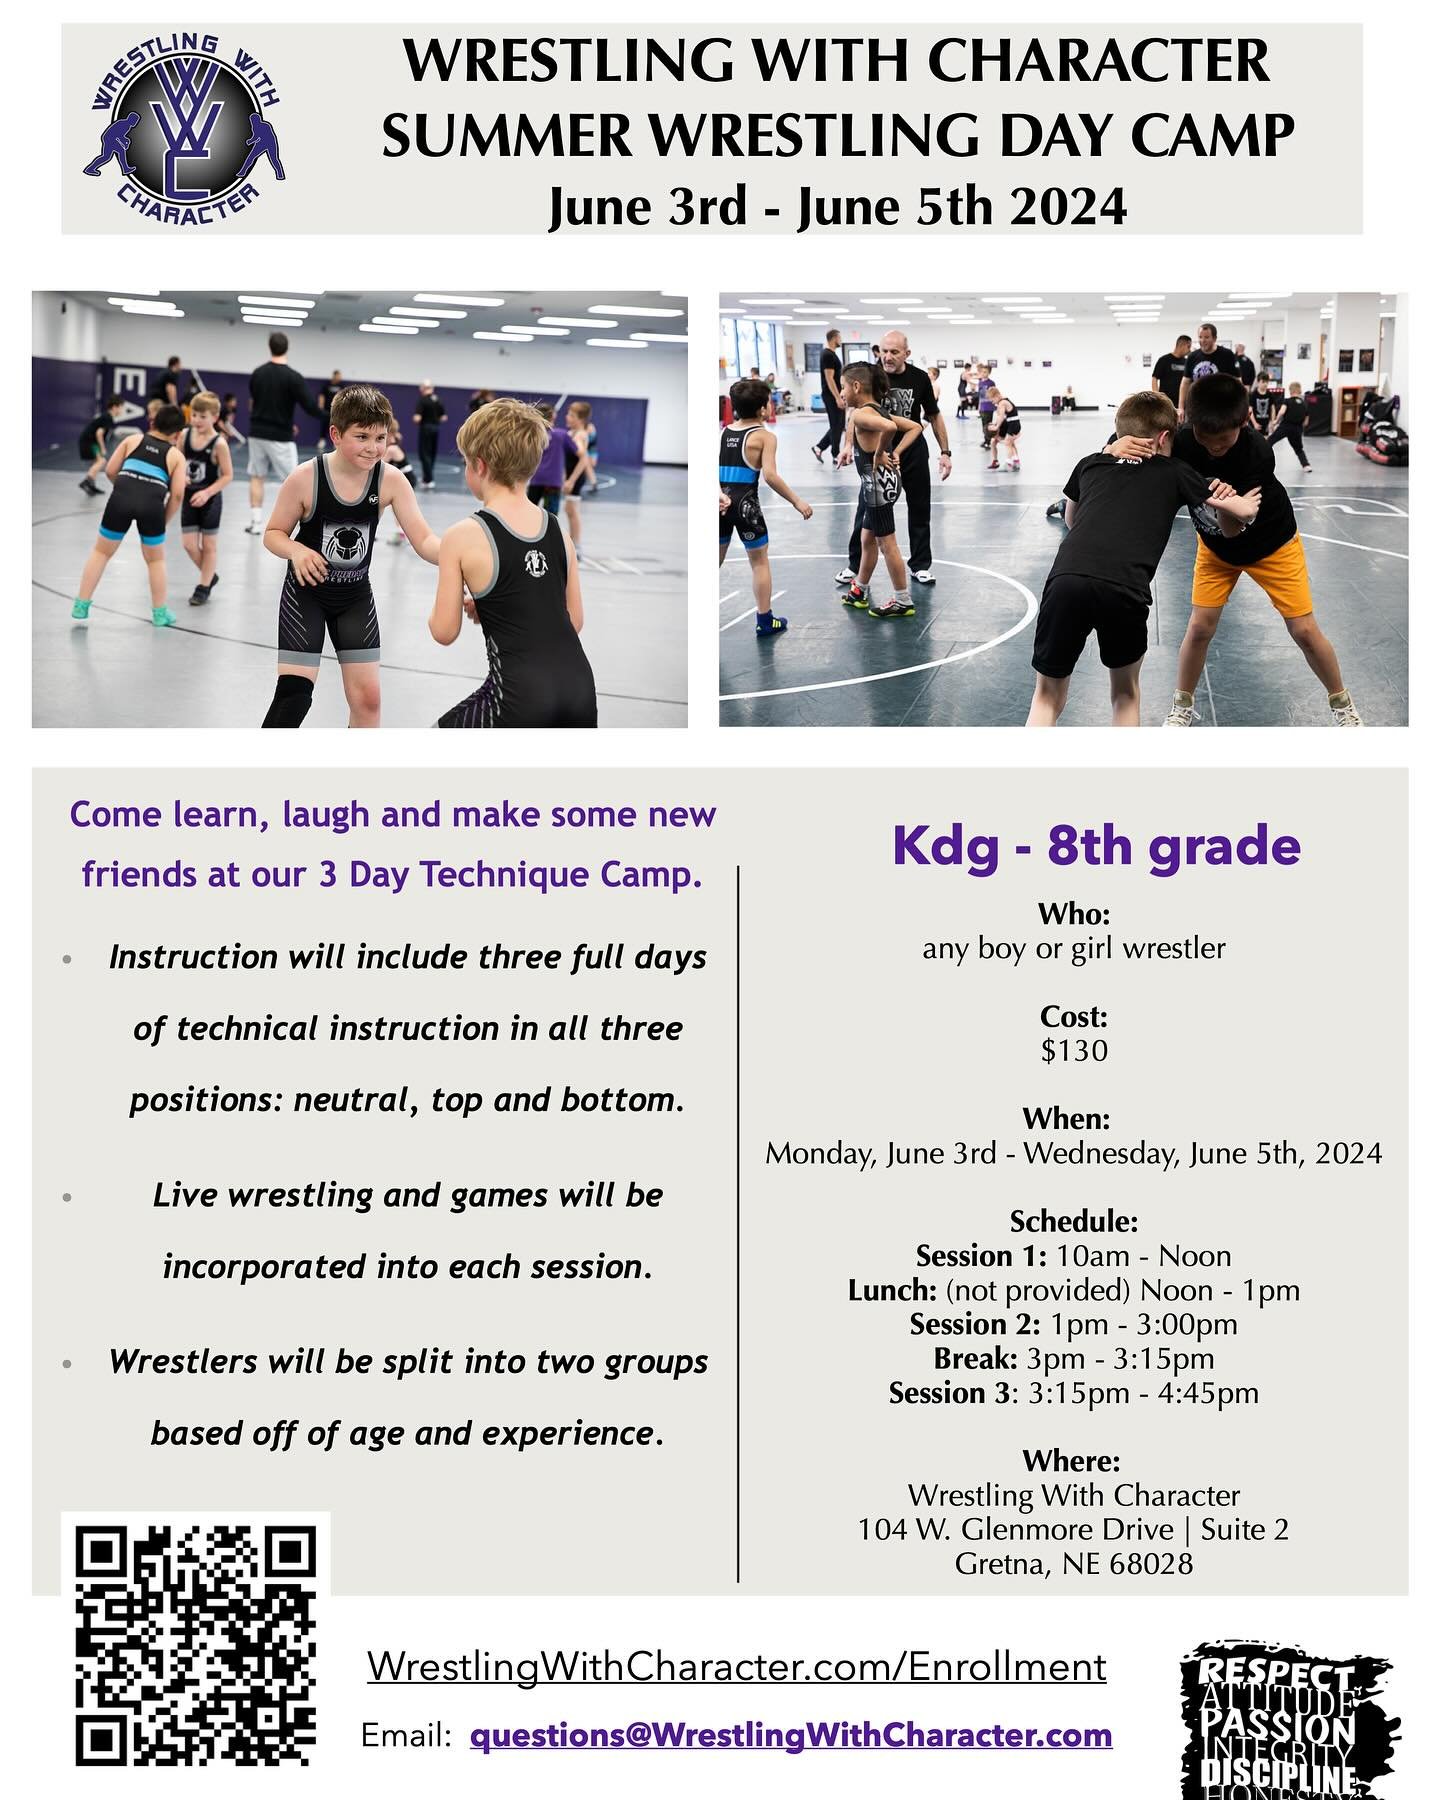 Registration is now open for our first day camp of the summer! 
wrestlingwithcharacter.com/enrollment